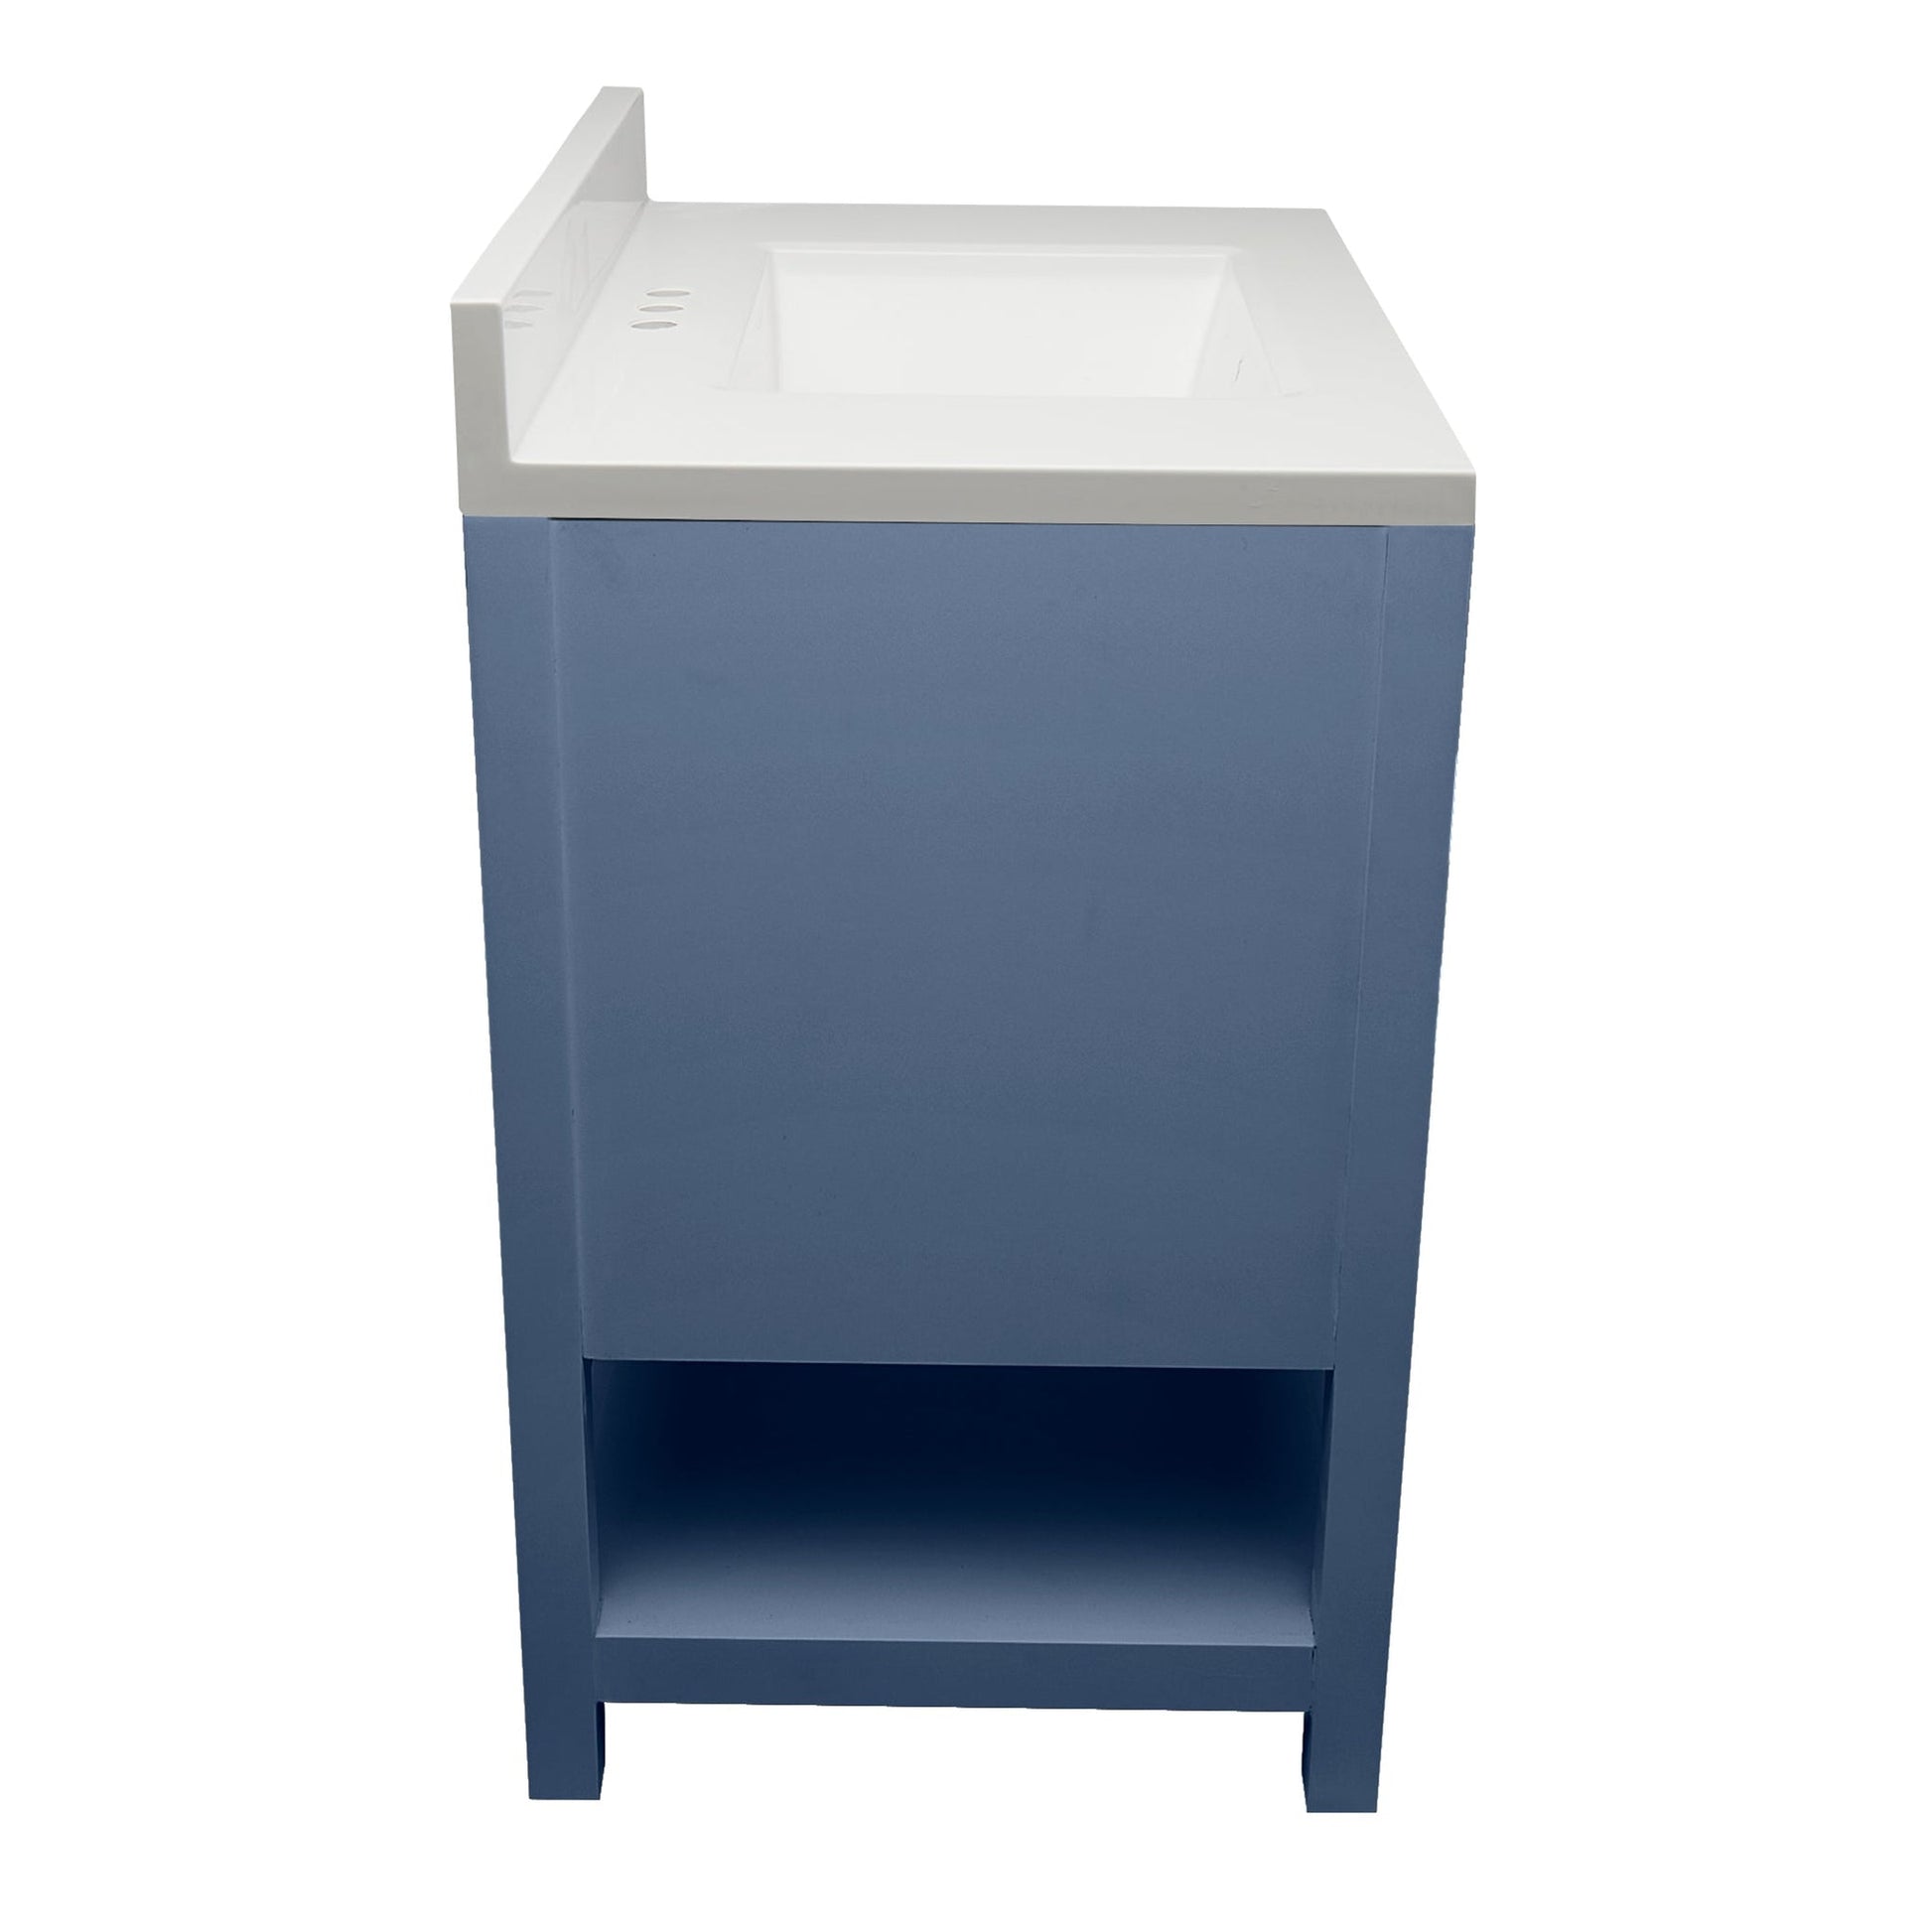 Ella's Bubbles Taos 31" Navy Blue Bathroom Vanity With White Cultured Marble Top With Backsplash and Sink